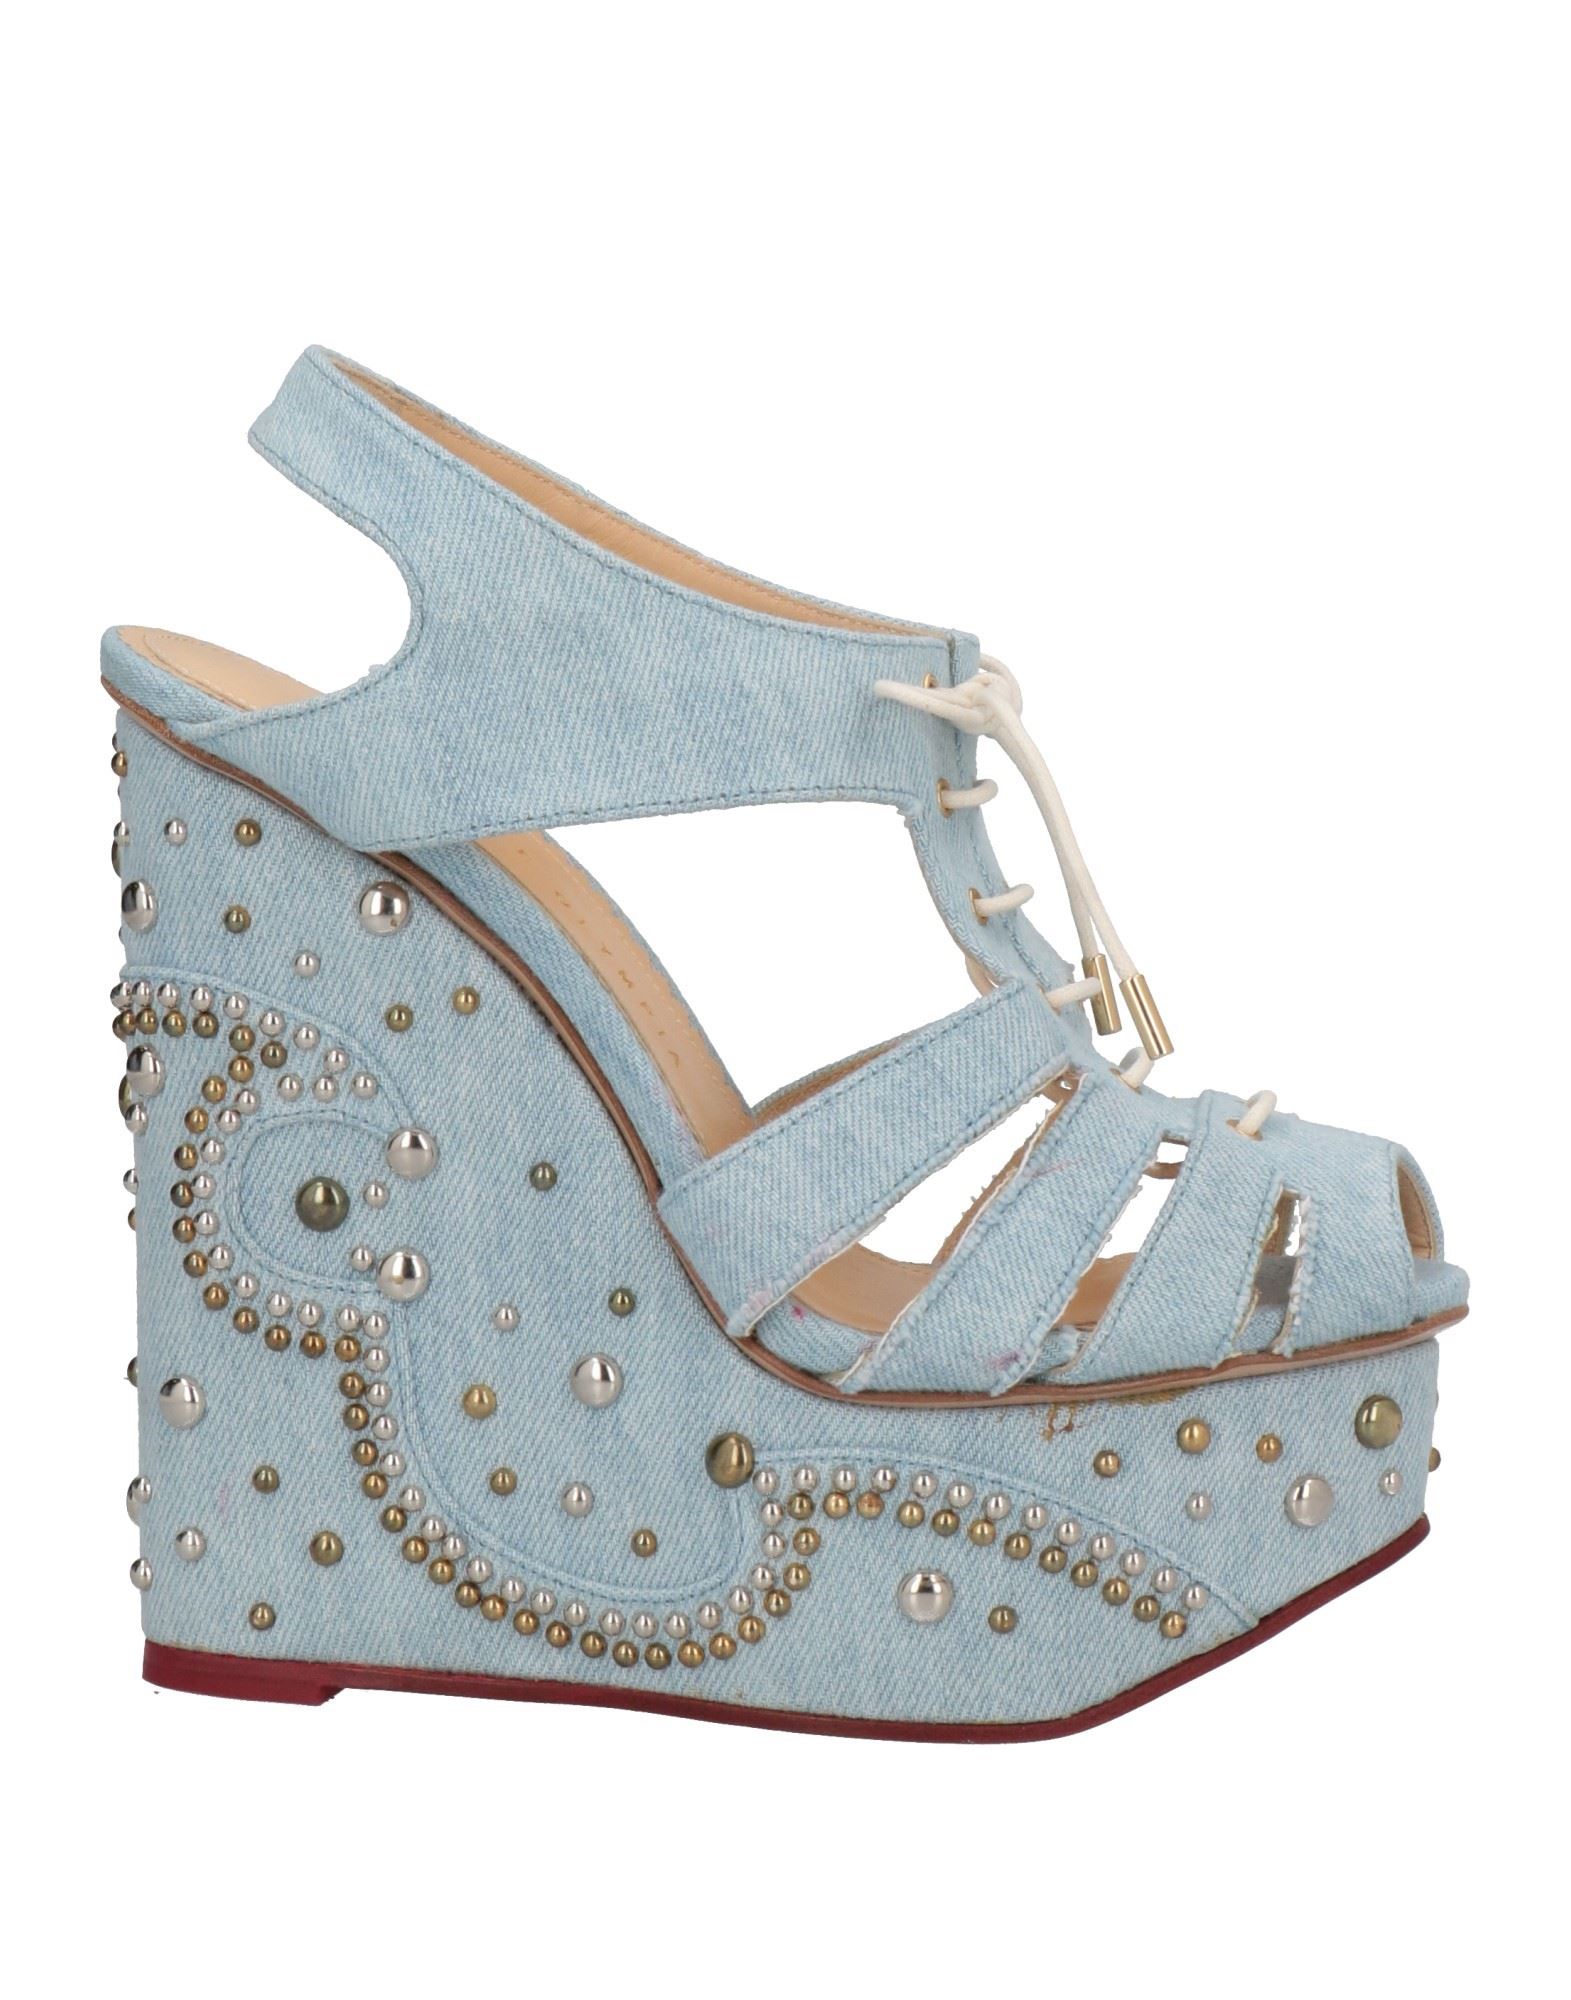 Charlotte Olympia Sandals In Blue